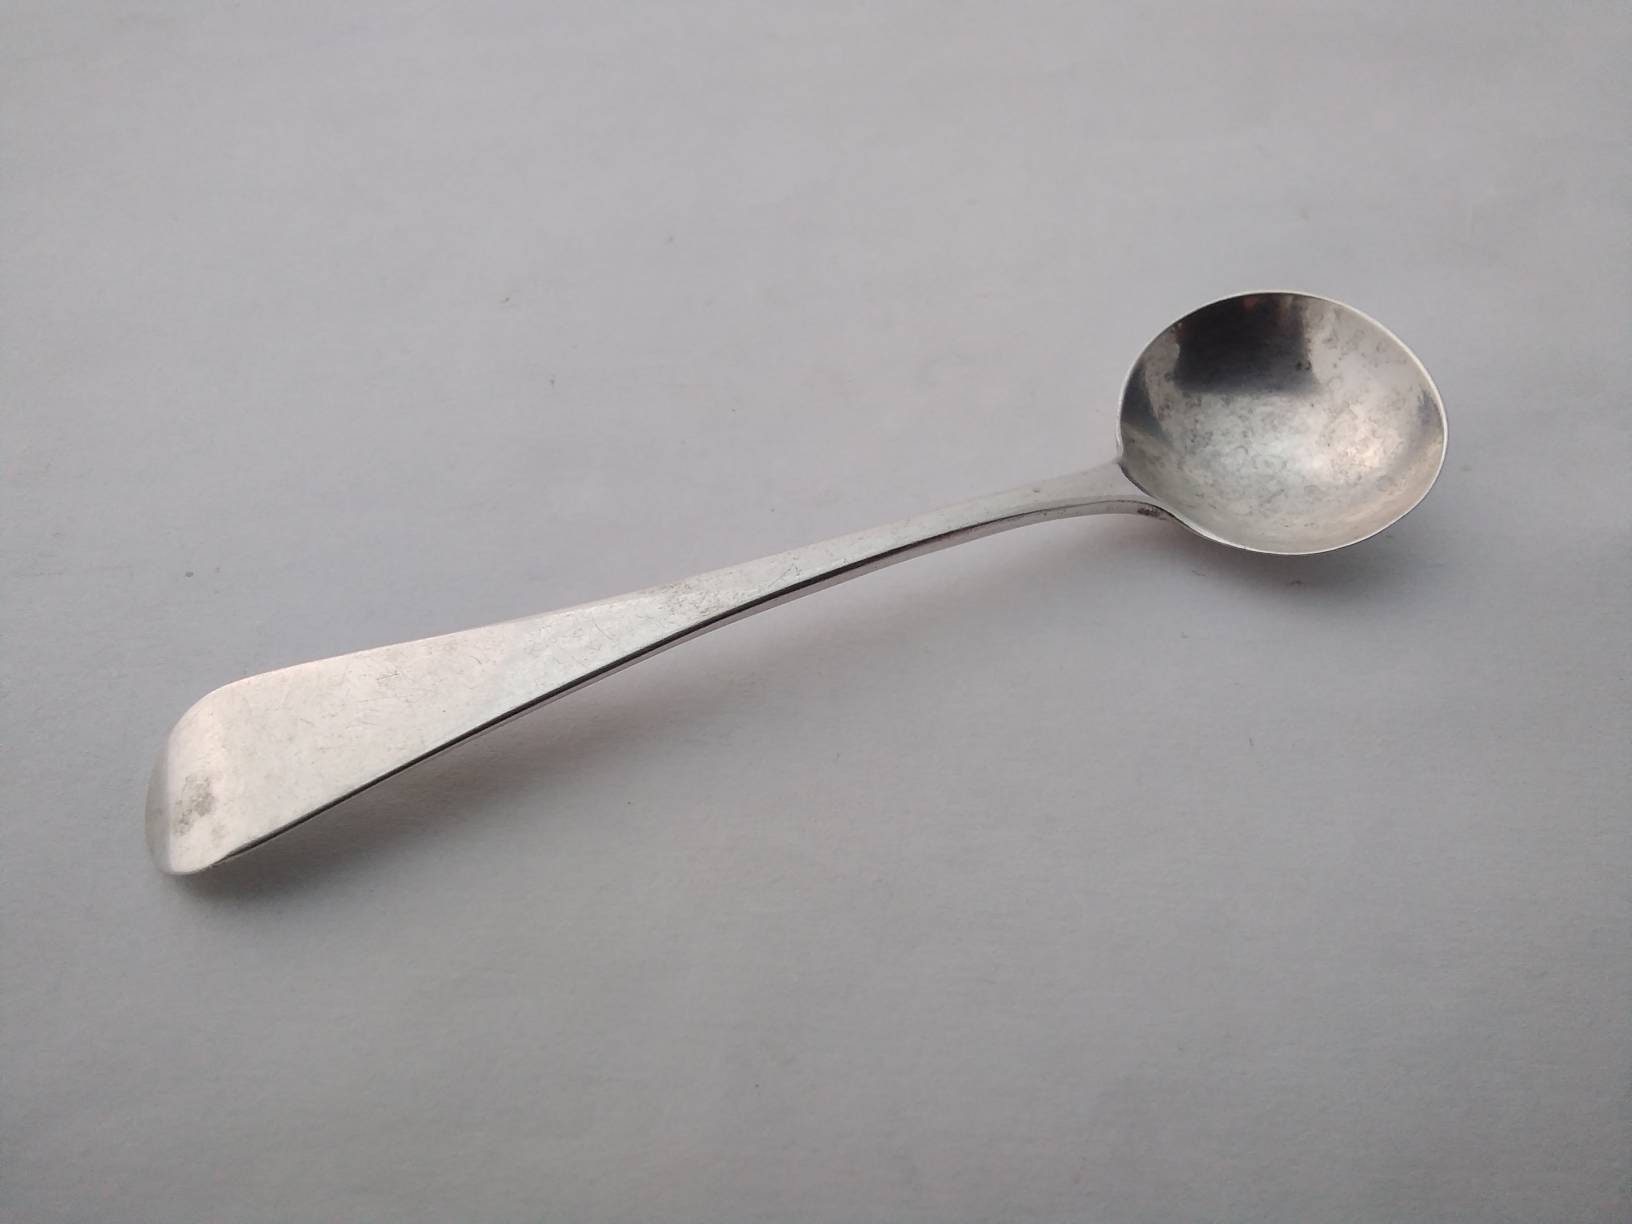 DOG NOSE with flowers DEMITASSE SPOON  1904 ENGLISH STERLING 